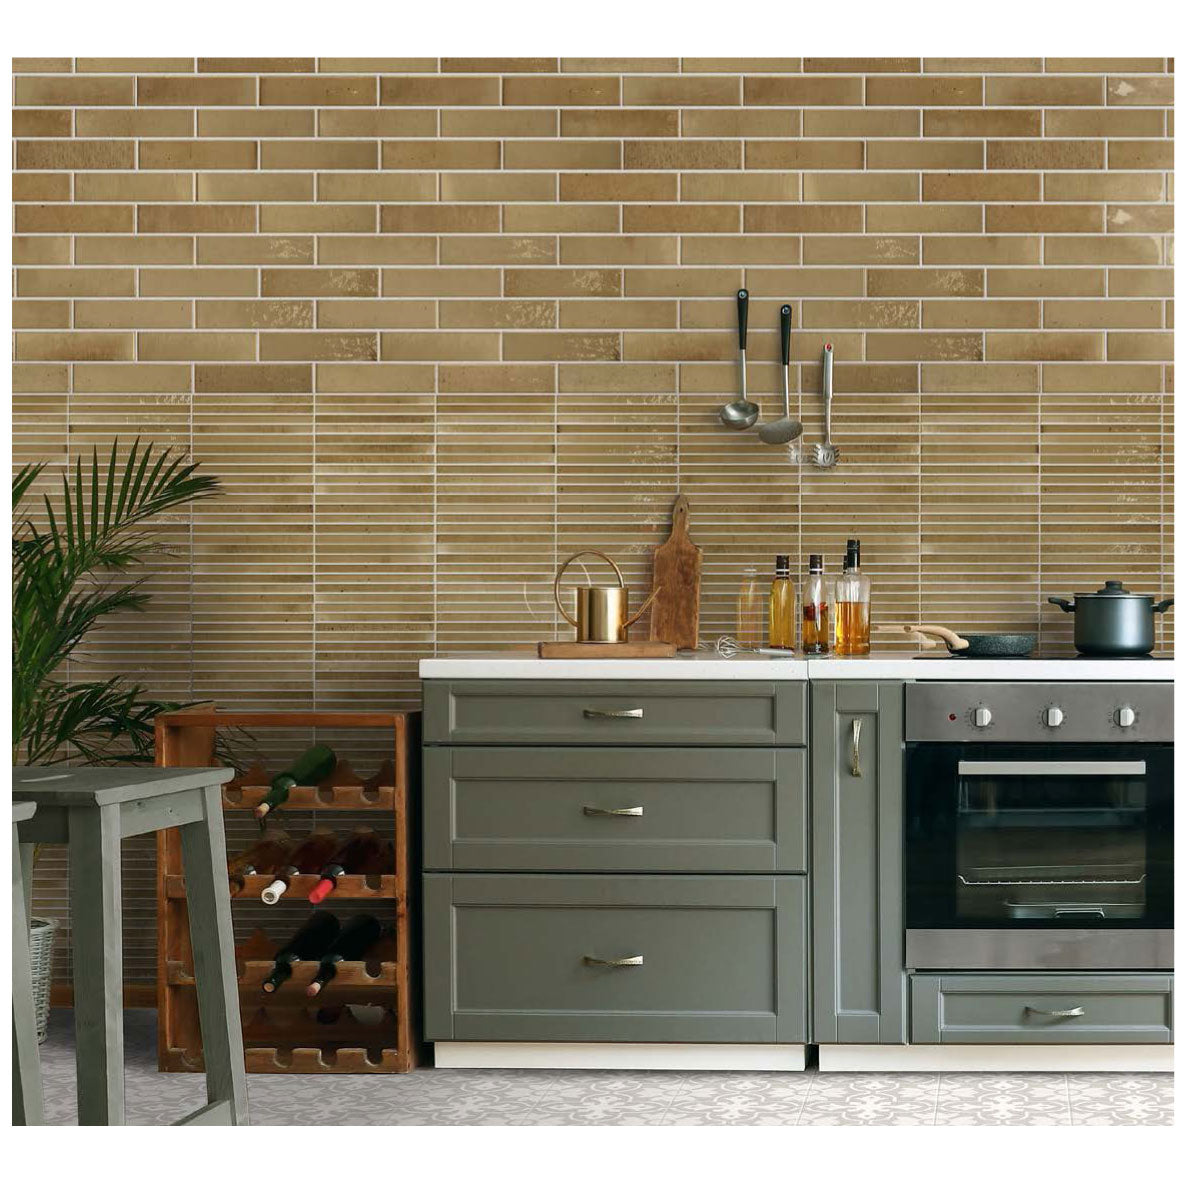 Cobsa - Homey Series 3 in. x 10 in. Porcelain Subway Tile - Curry Installed